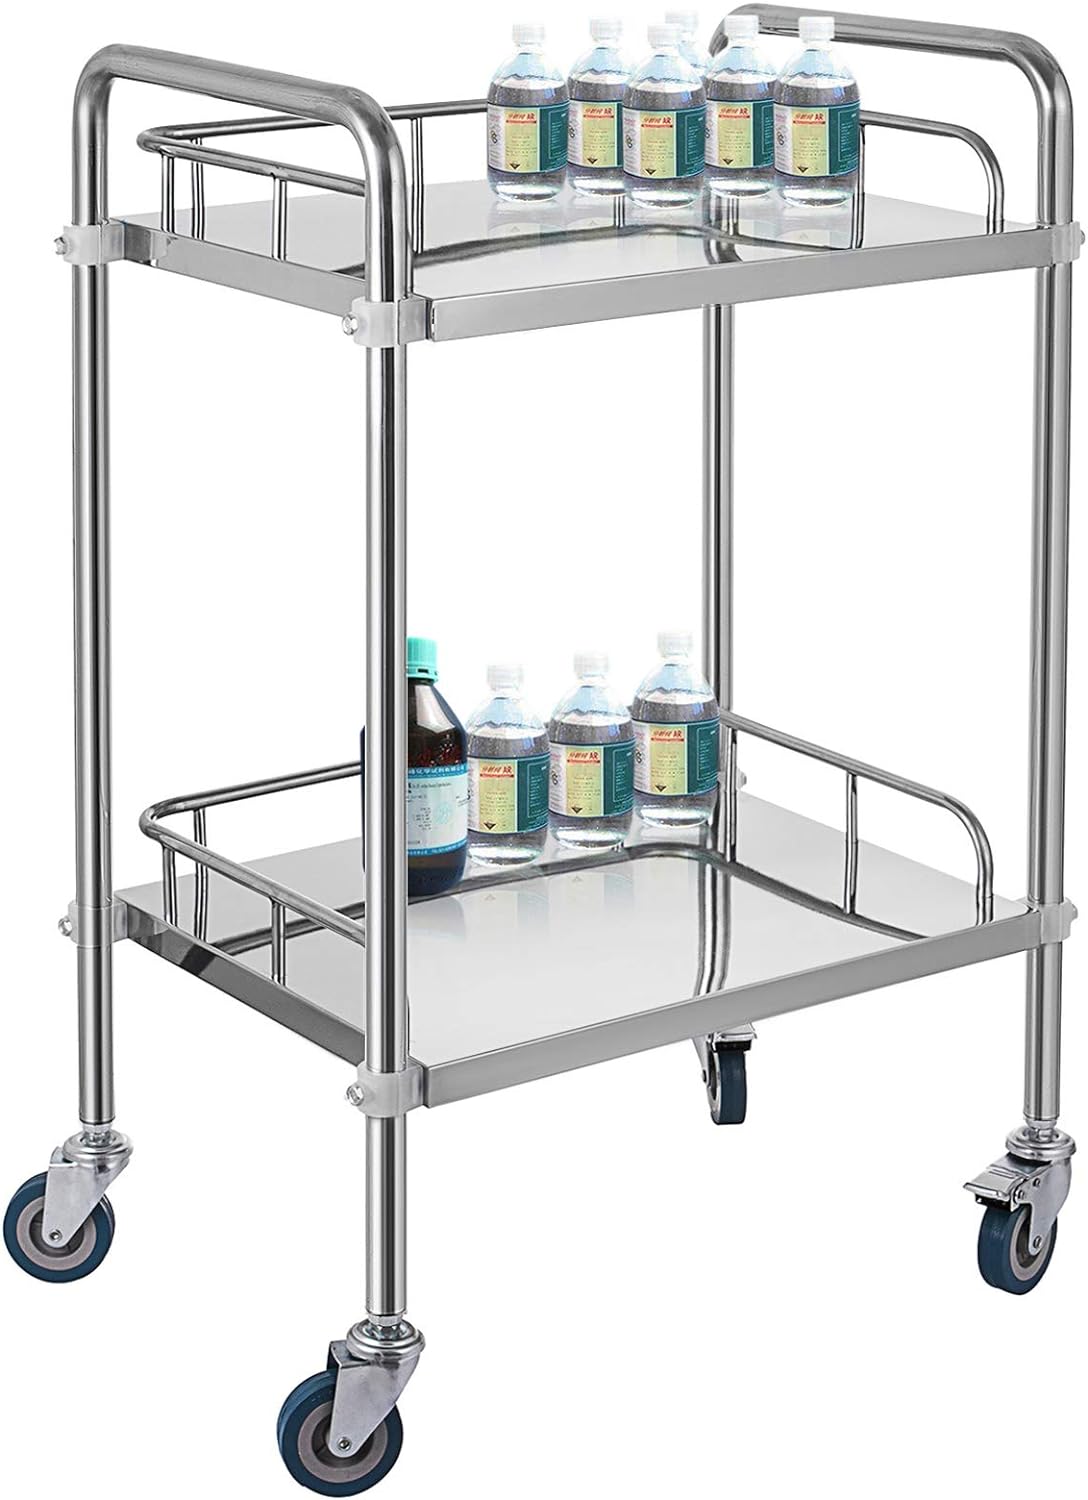 VEVOR 2-Shelf lab cart with Wheels Stainless Steel Rolling cart Lab Cart Utility Cart with high-Polish Stainless Steel 2 Lockable Whe